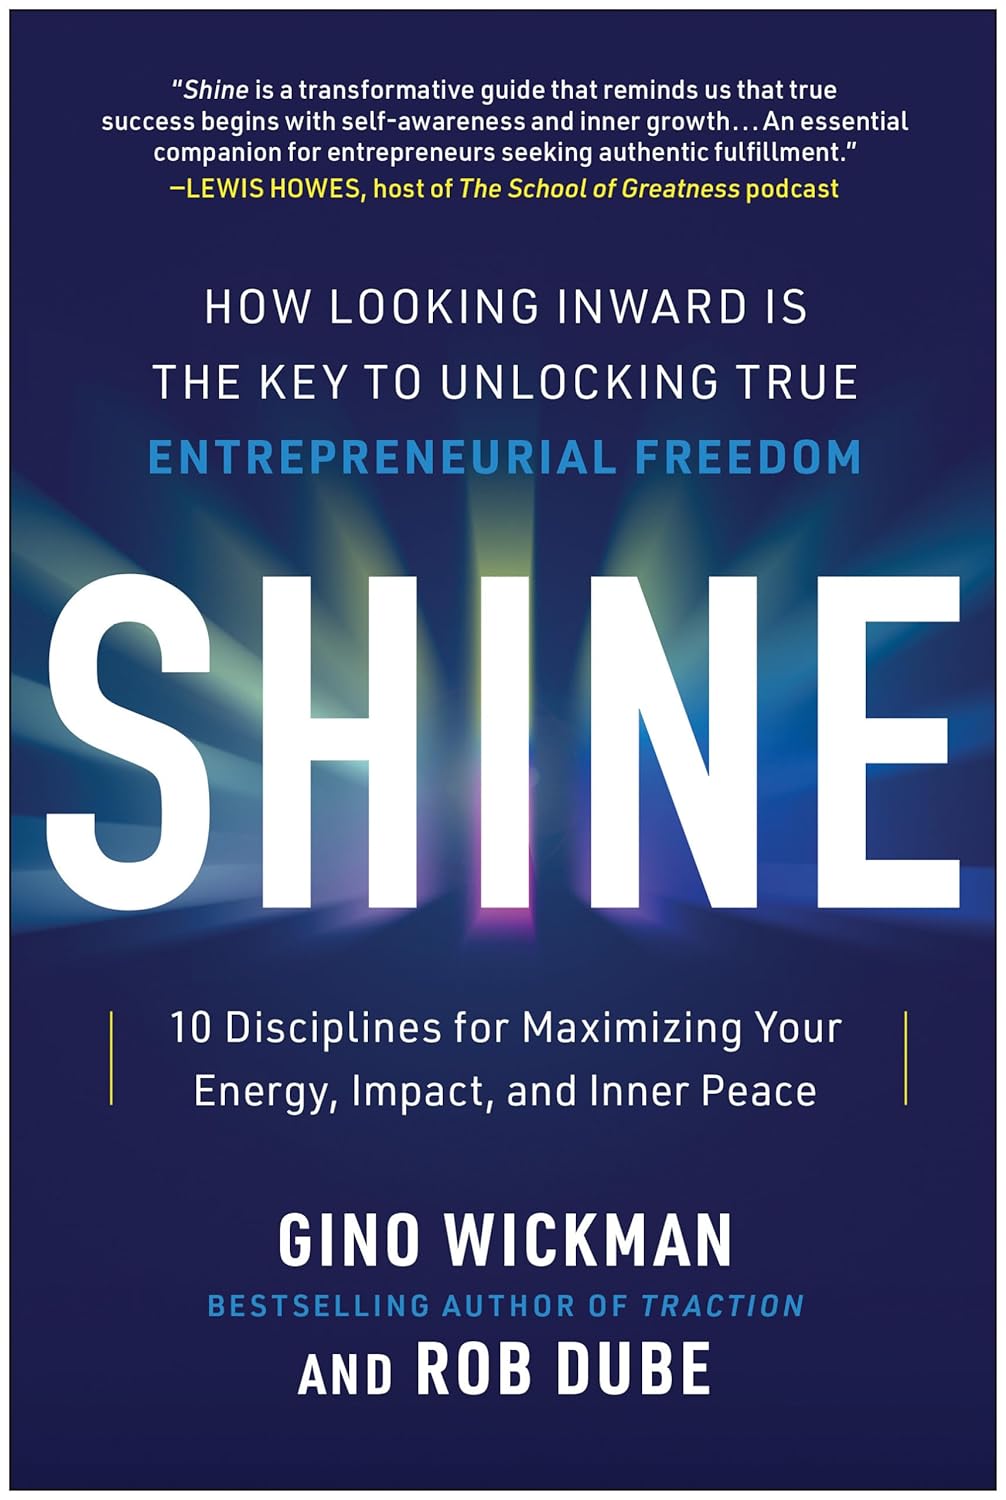 Entrepreneurs often have a burning need to succeed. But that same relentless brilliance that propels you in your career can take a toll on your teams, personal relationships, and even your health. Gino Wickman, bestselling author of Traction, teams up with mindfulness expert Rob Dube to help readers strike a crucial balance between those inner and outer worlds while taking your success to new heights.